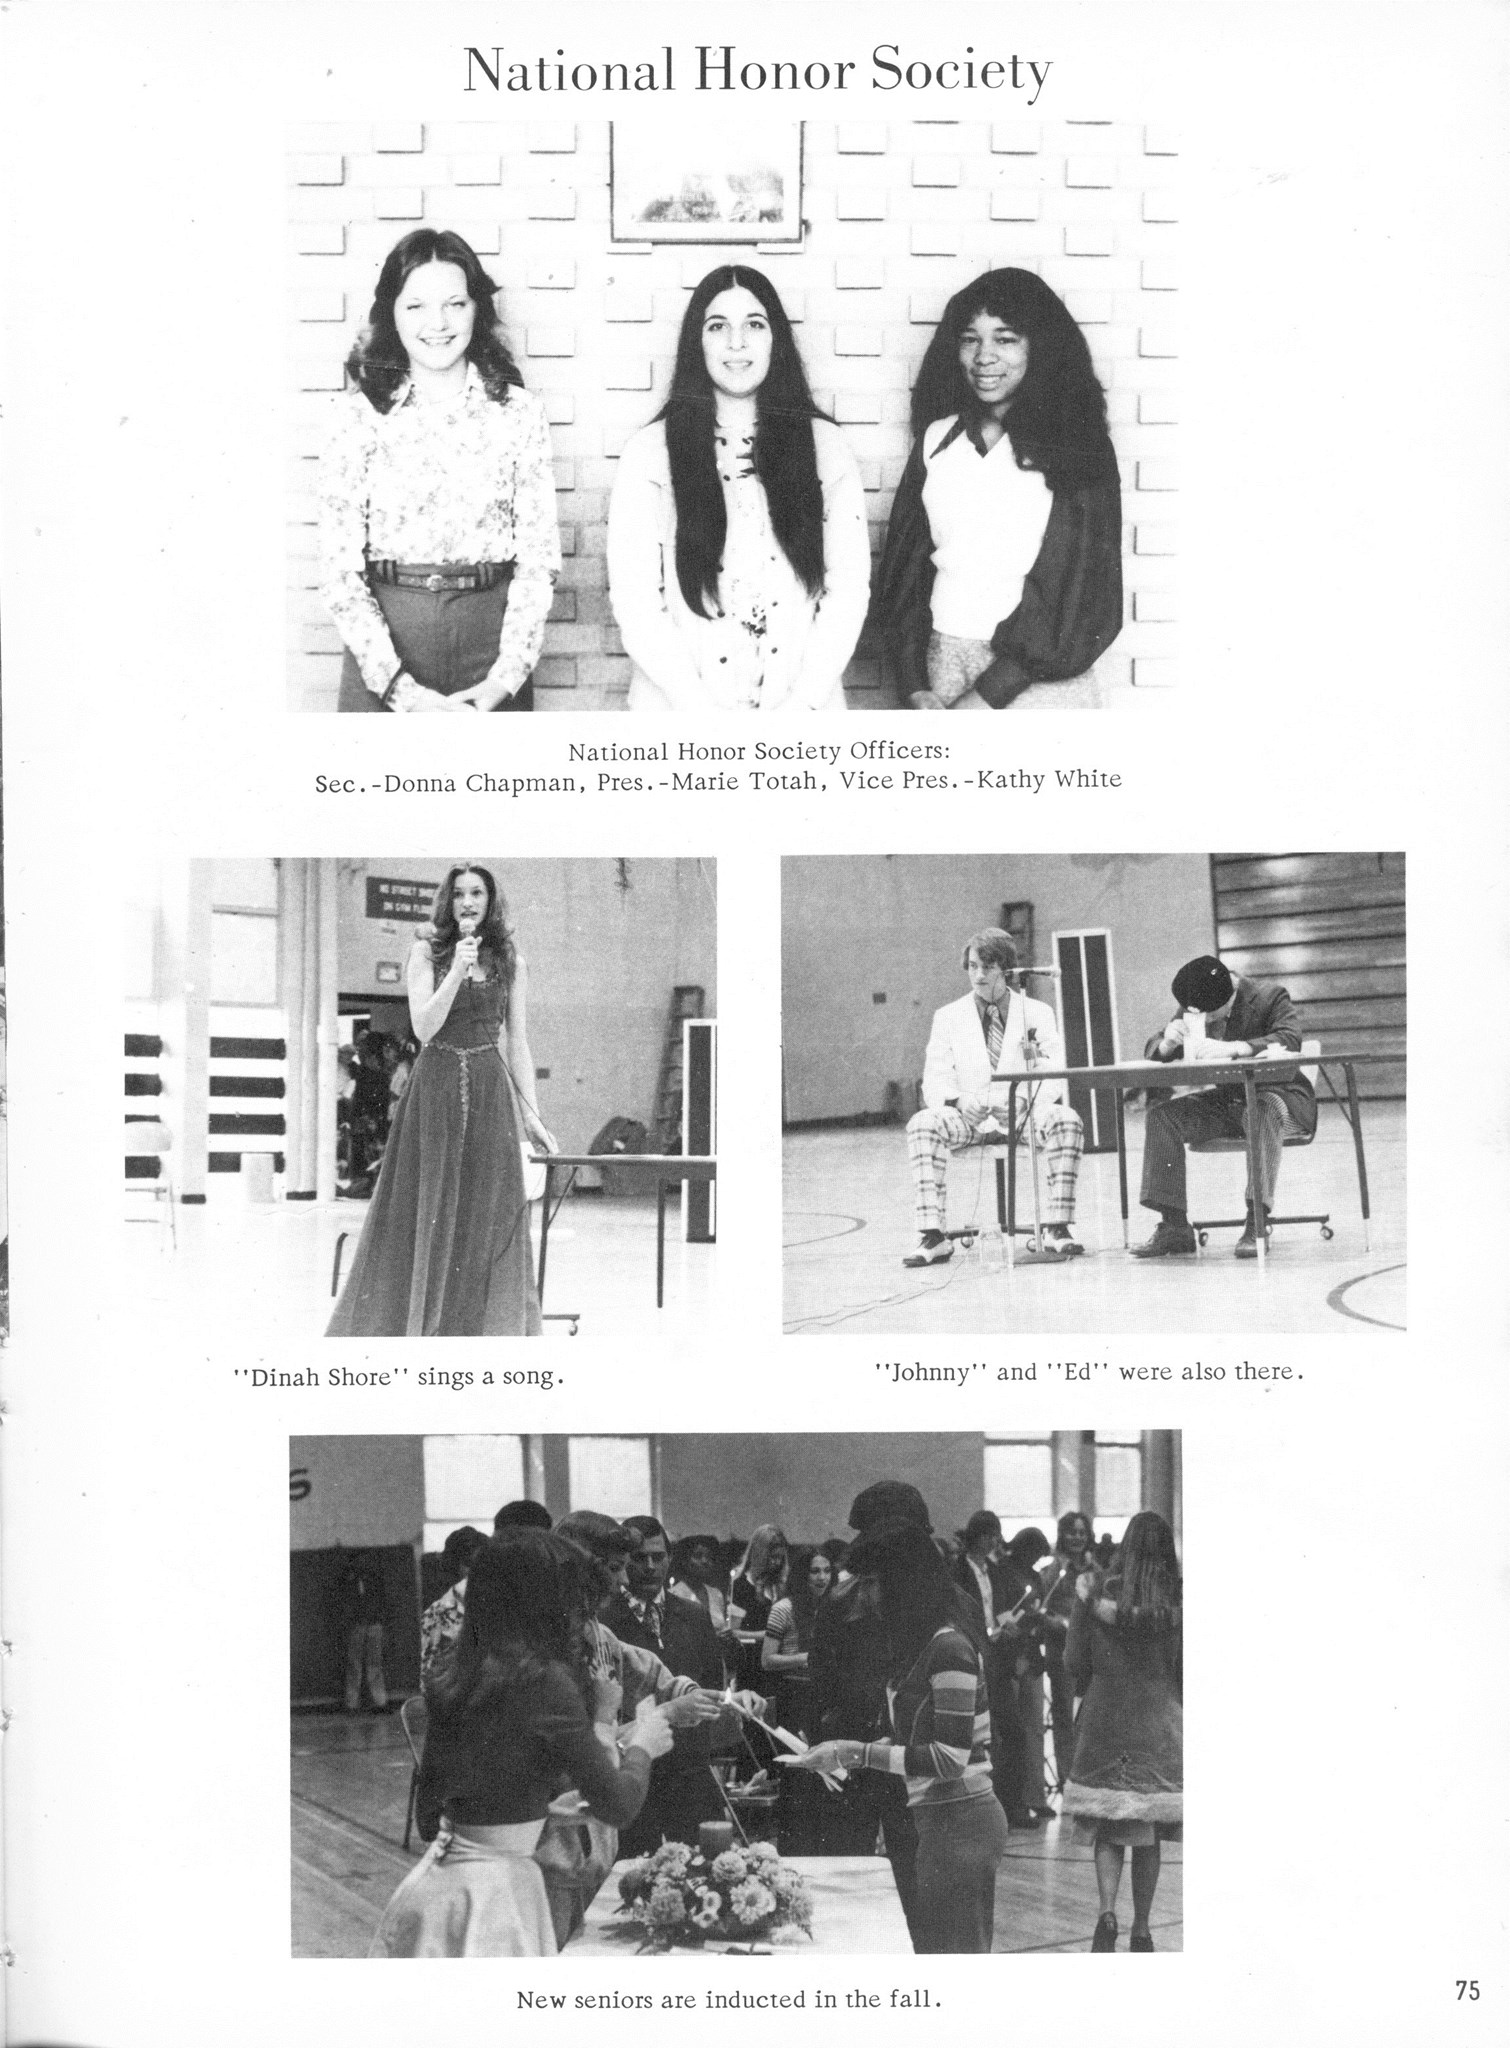 ../../../Images/Large/1976/Arclight-1976-pg0075.jpg